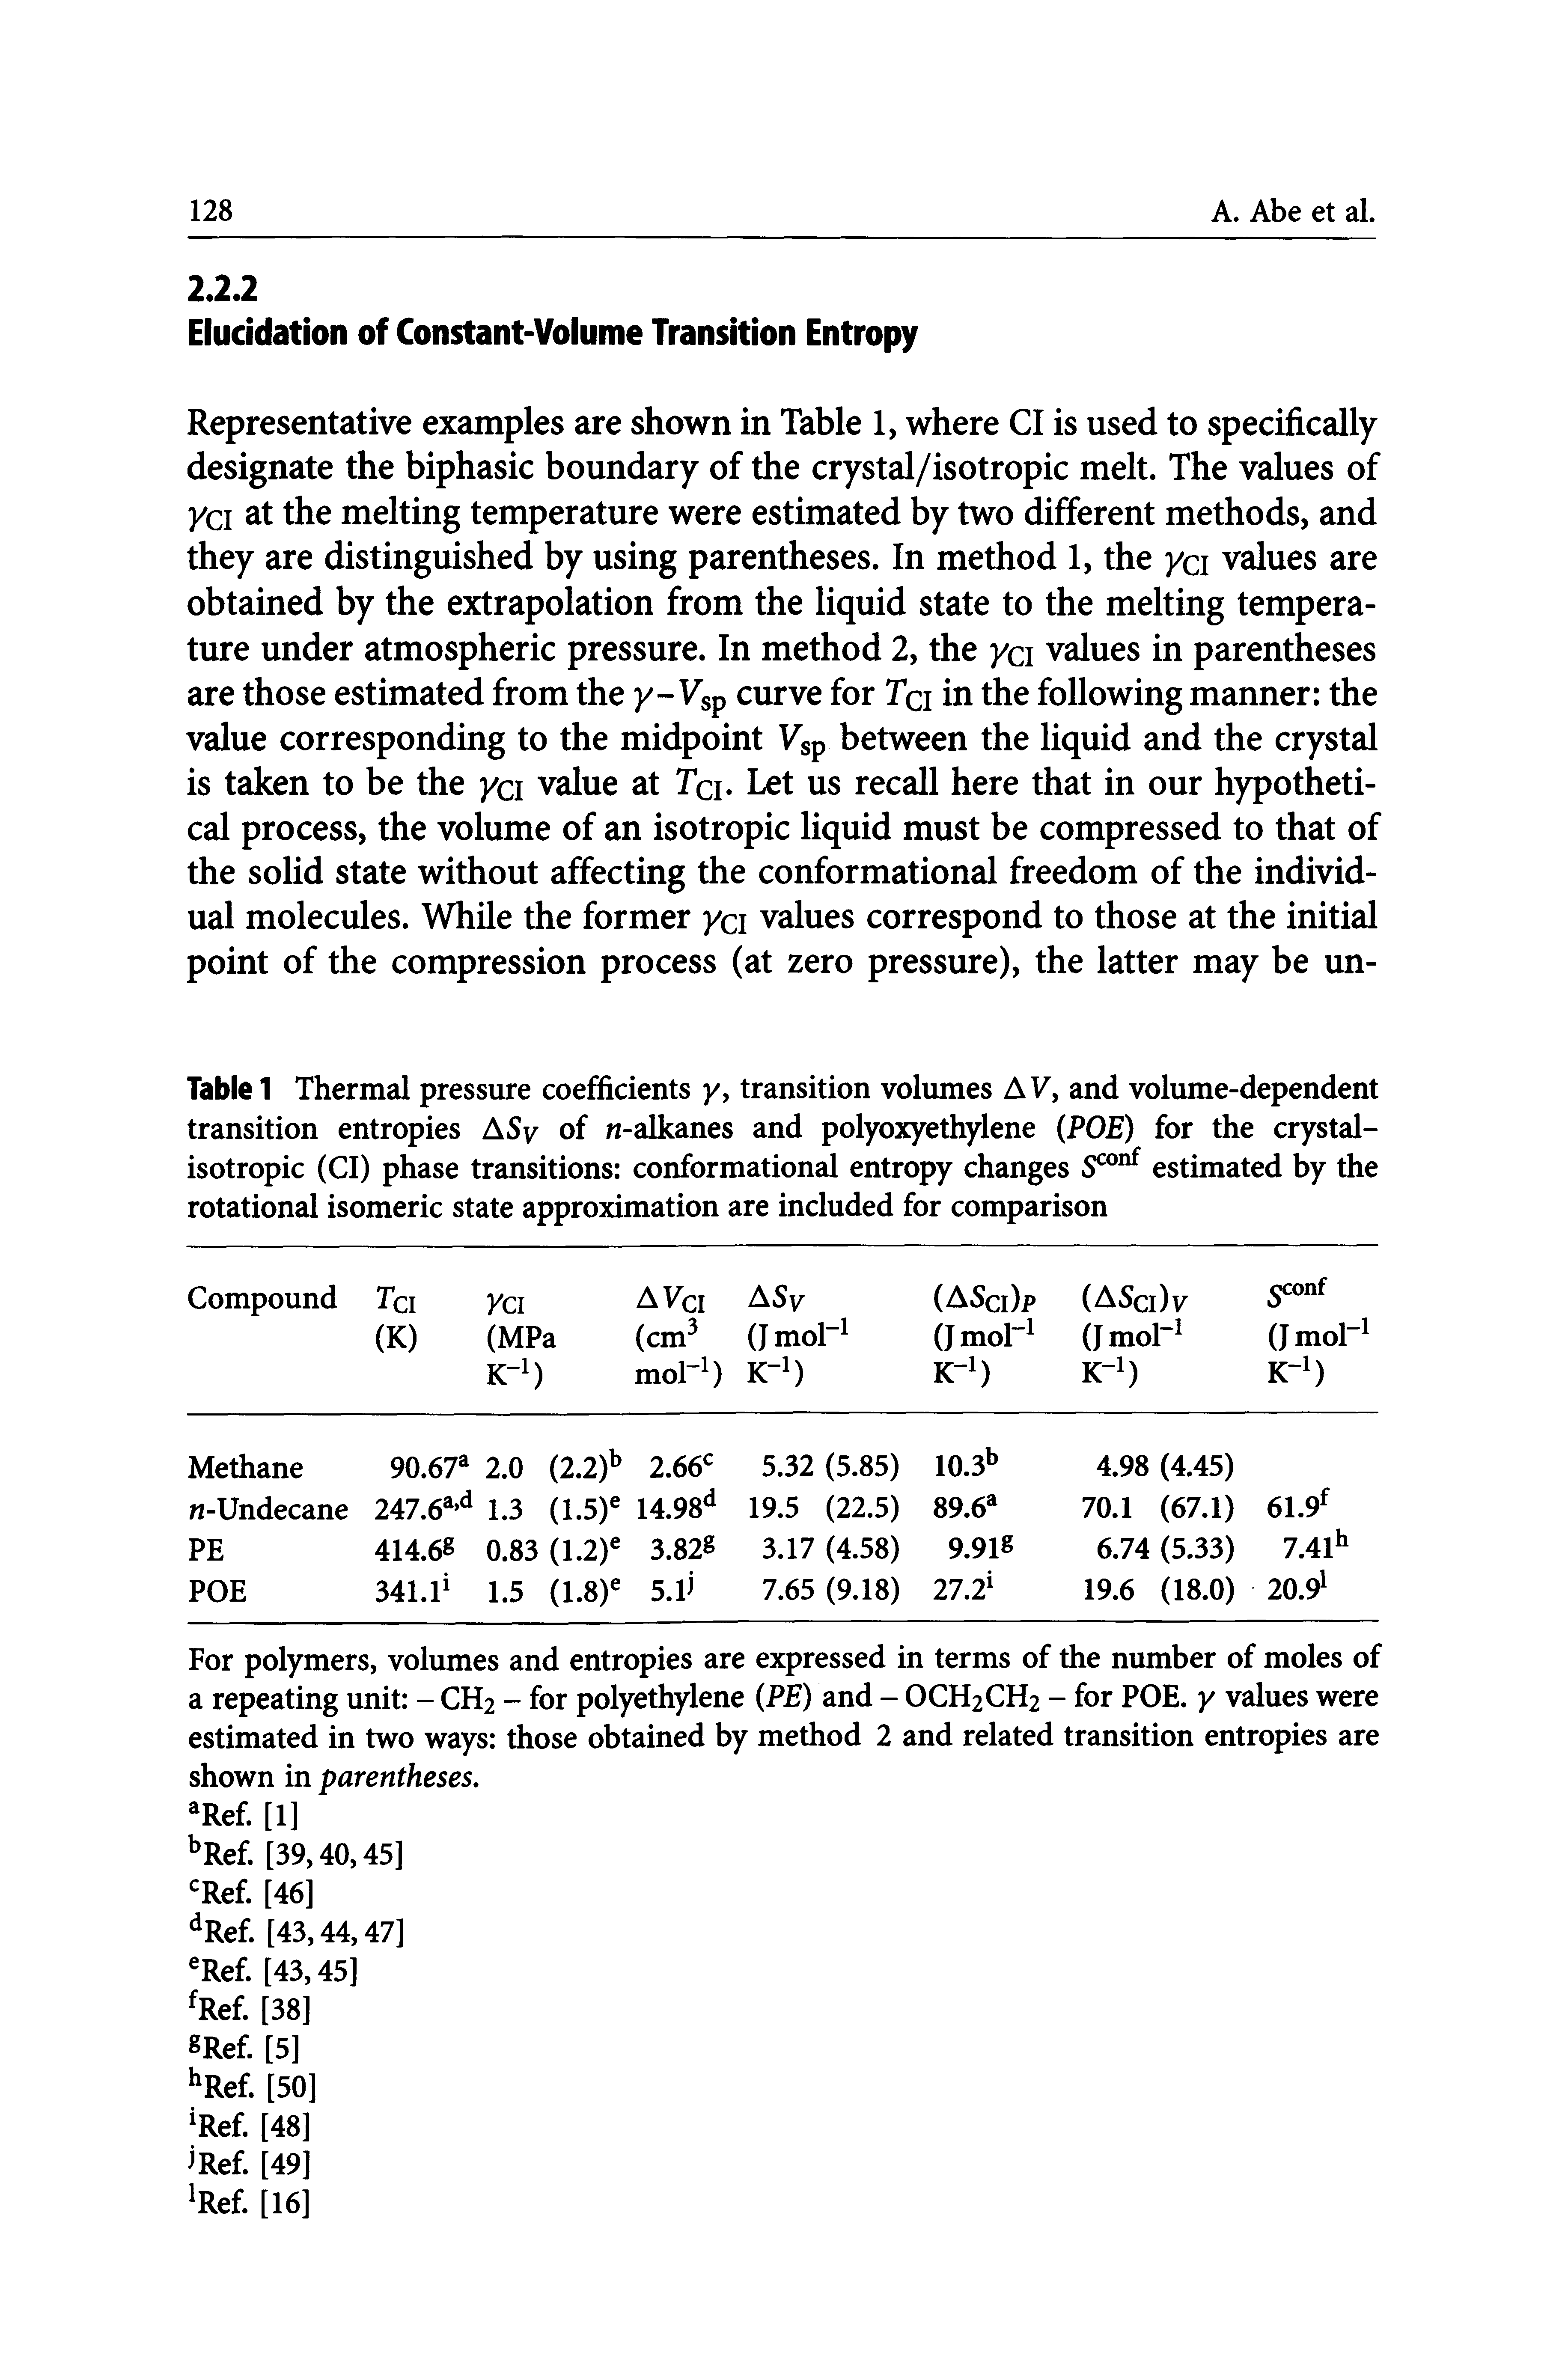 Table 1 Thermal pressure coefficients y, transition volumes A 7, and volume-dependent transition entropies ASy of n-alkanes and polyoxyethylene (POE) for the crystal-isotropic (Cl) phase transitions conformational entropy changes estimated by the rotational isomeric state approximation are included for comparison...